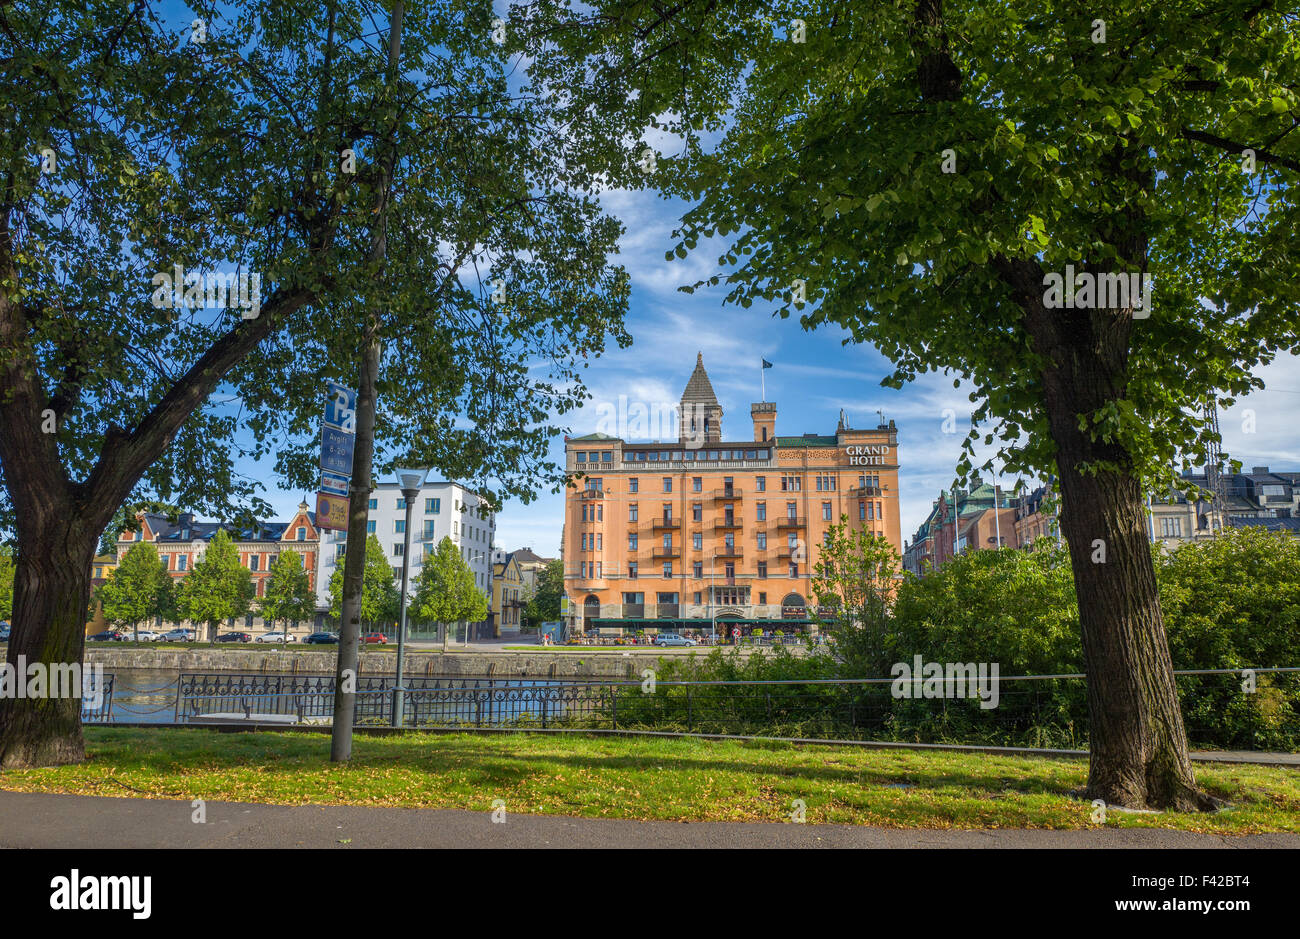 Grand Hotel Norrkoping Stock Photos Grand Hotel Norrkoping - 